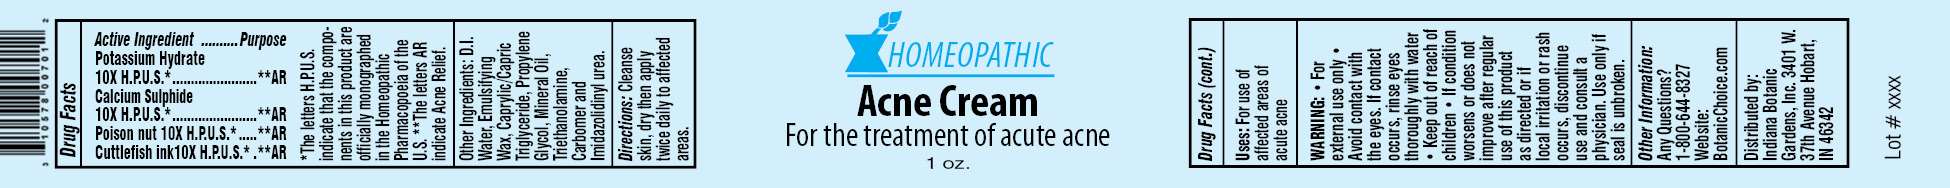 Homeopathic Acne